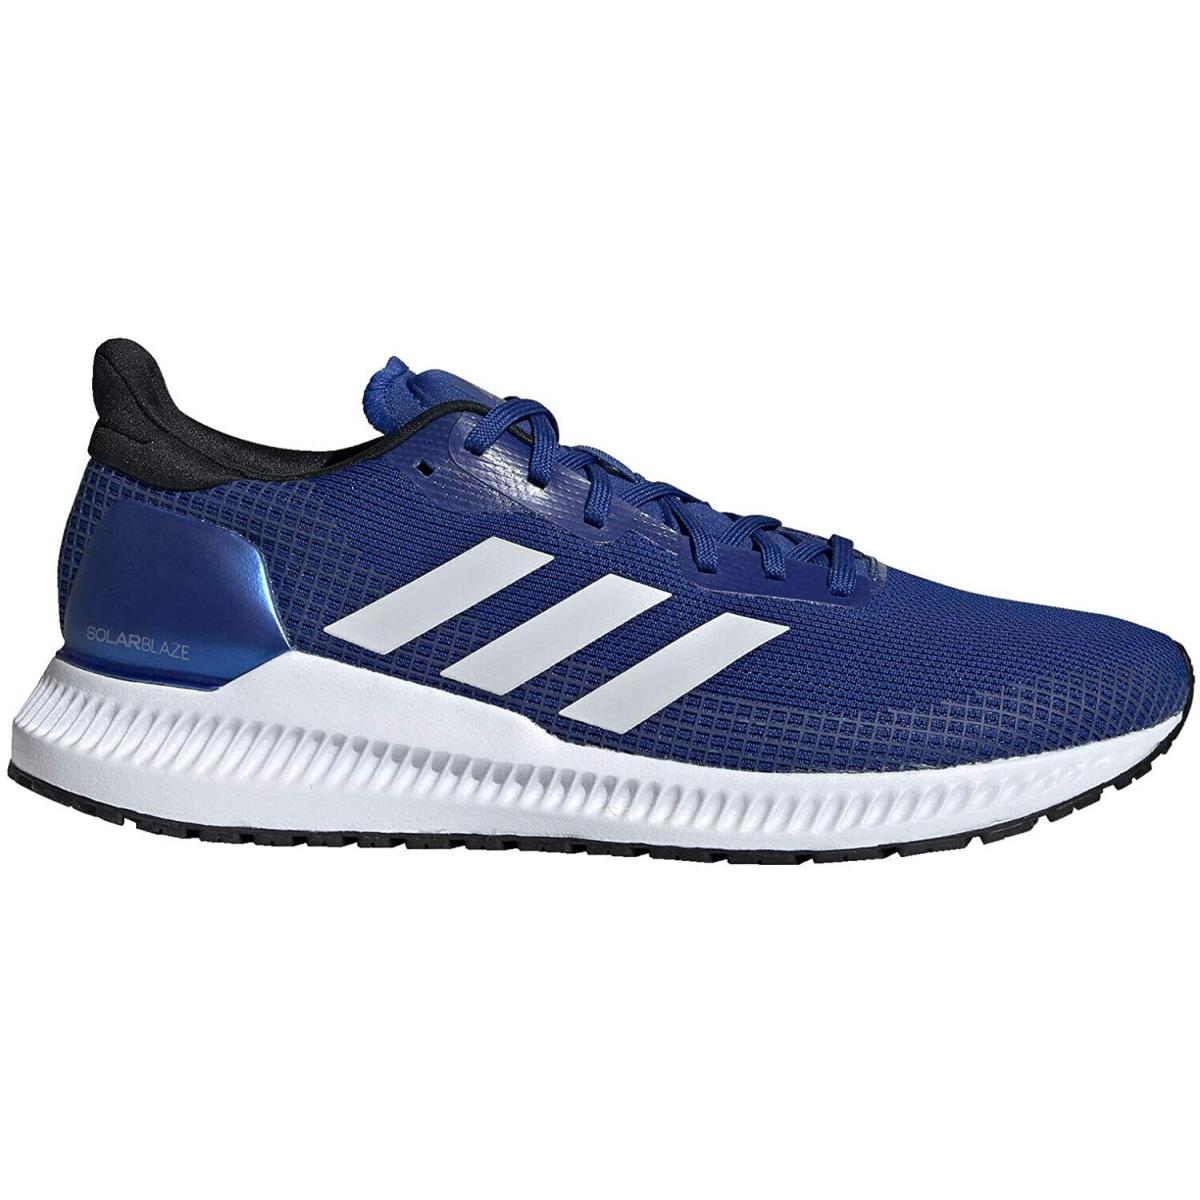 Adidas Mens Solar Blaze Athletic Running Sneakers Shoes Blue US 7M